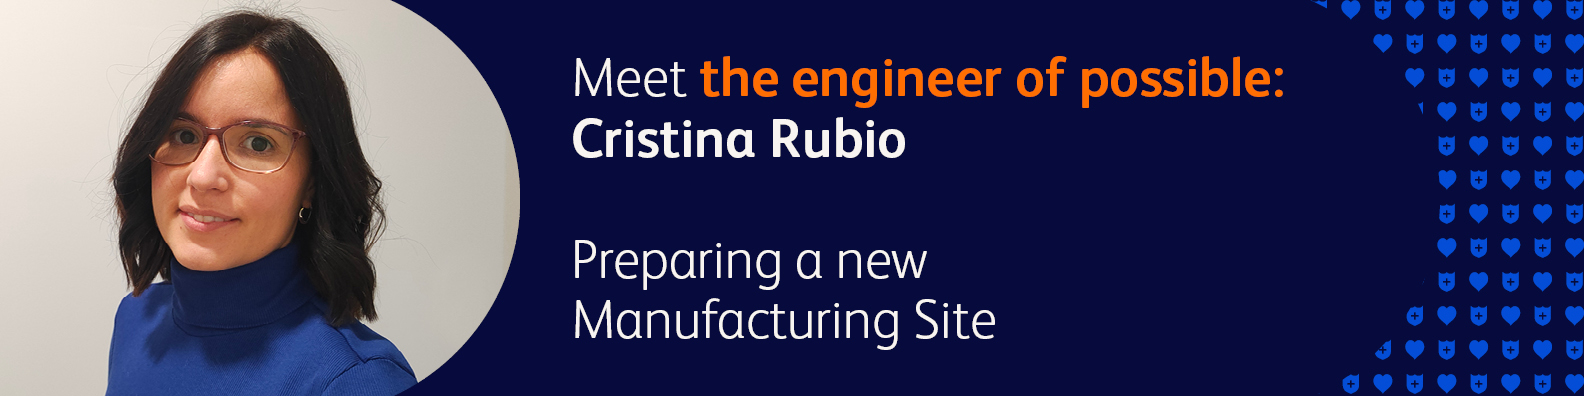 Site Validation Leader (Engineer) for the new BD manufacturing site in Zaragoza Spain, Cristina Rubio